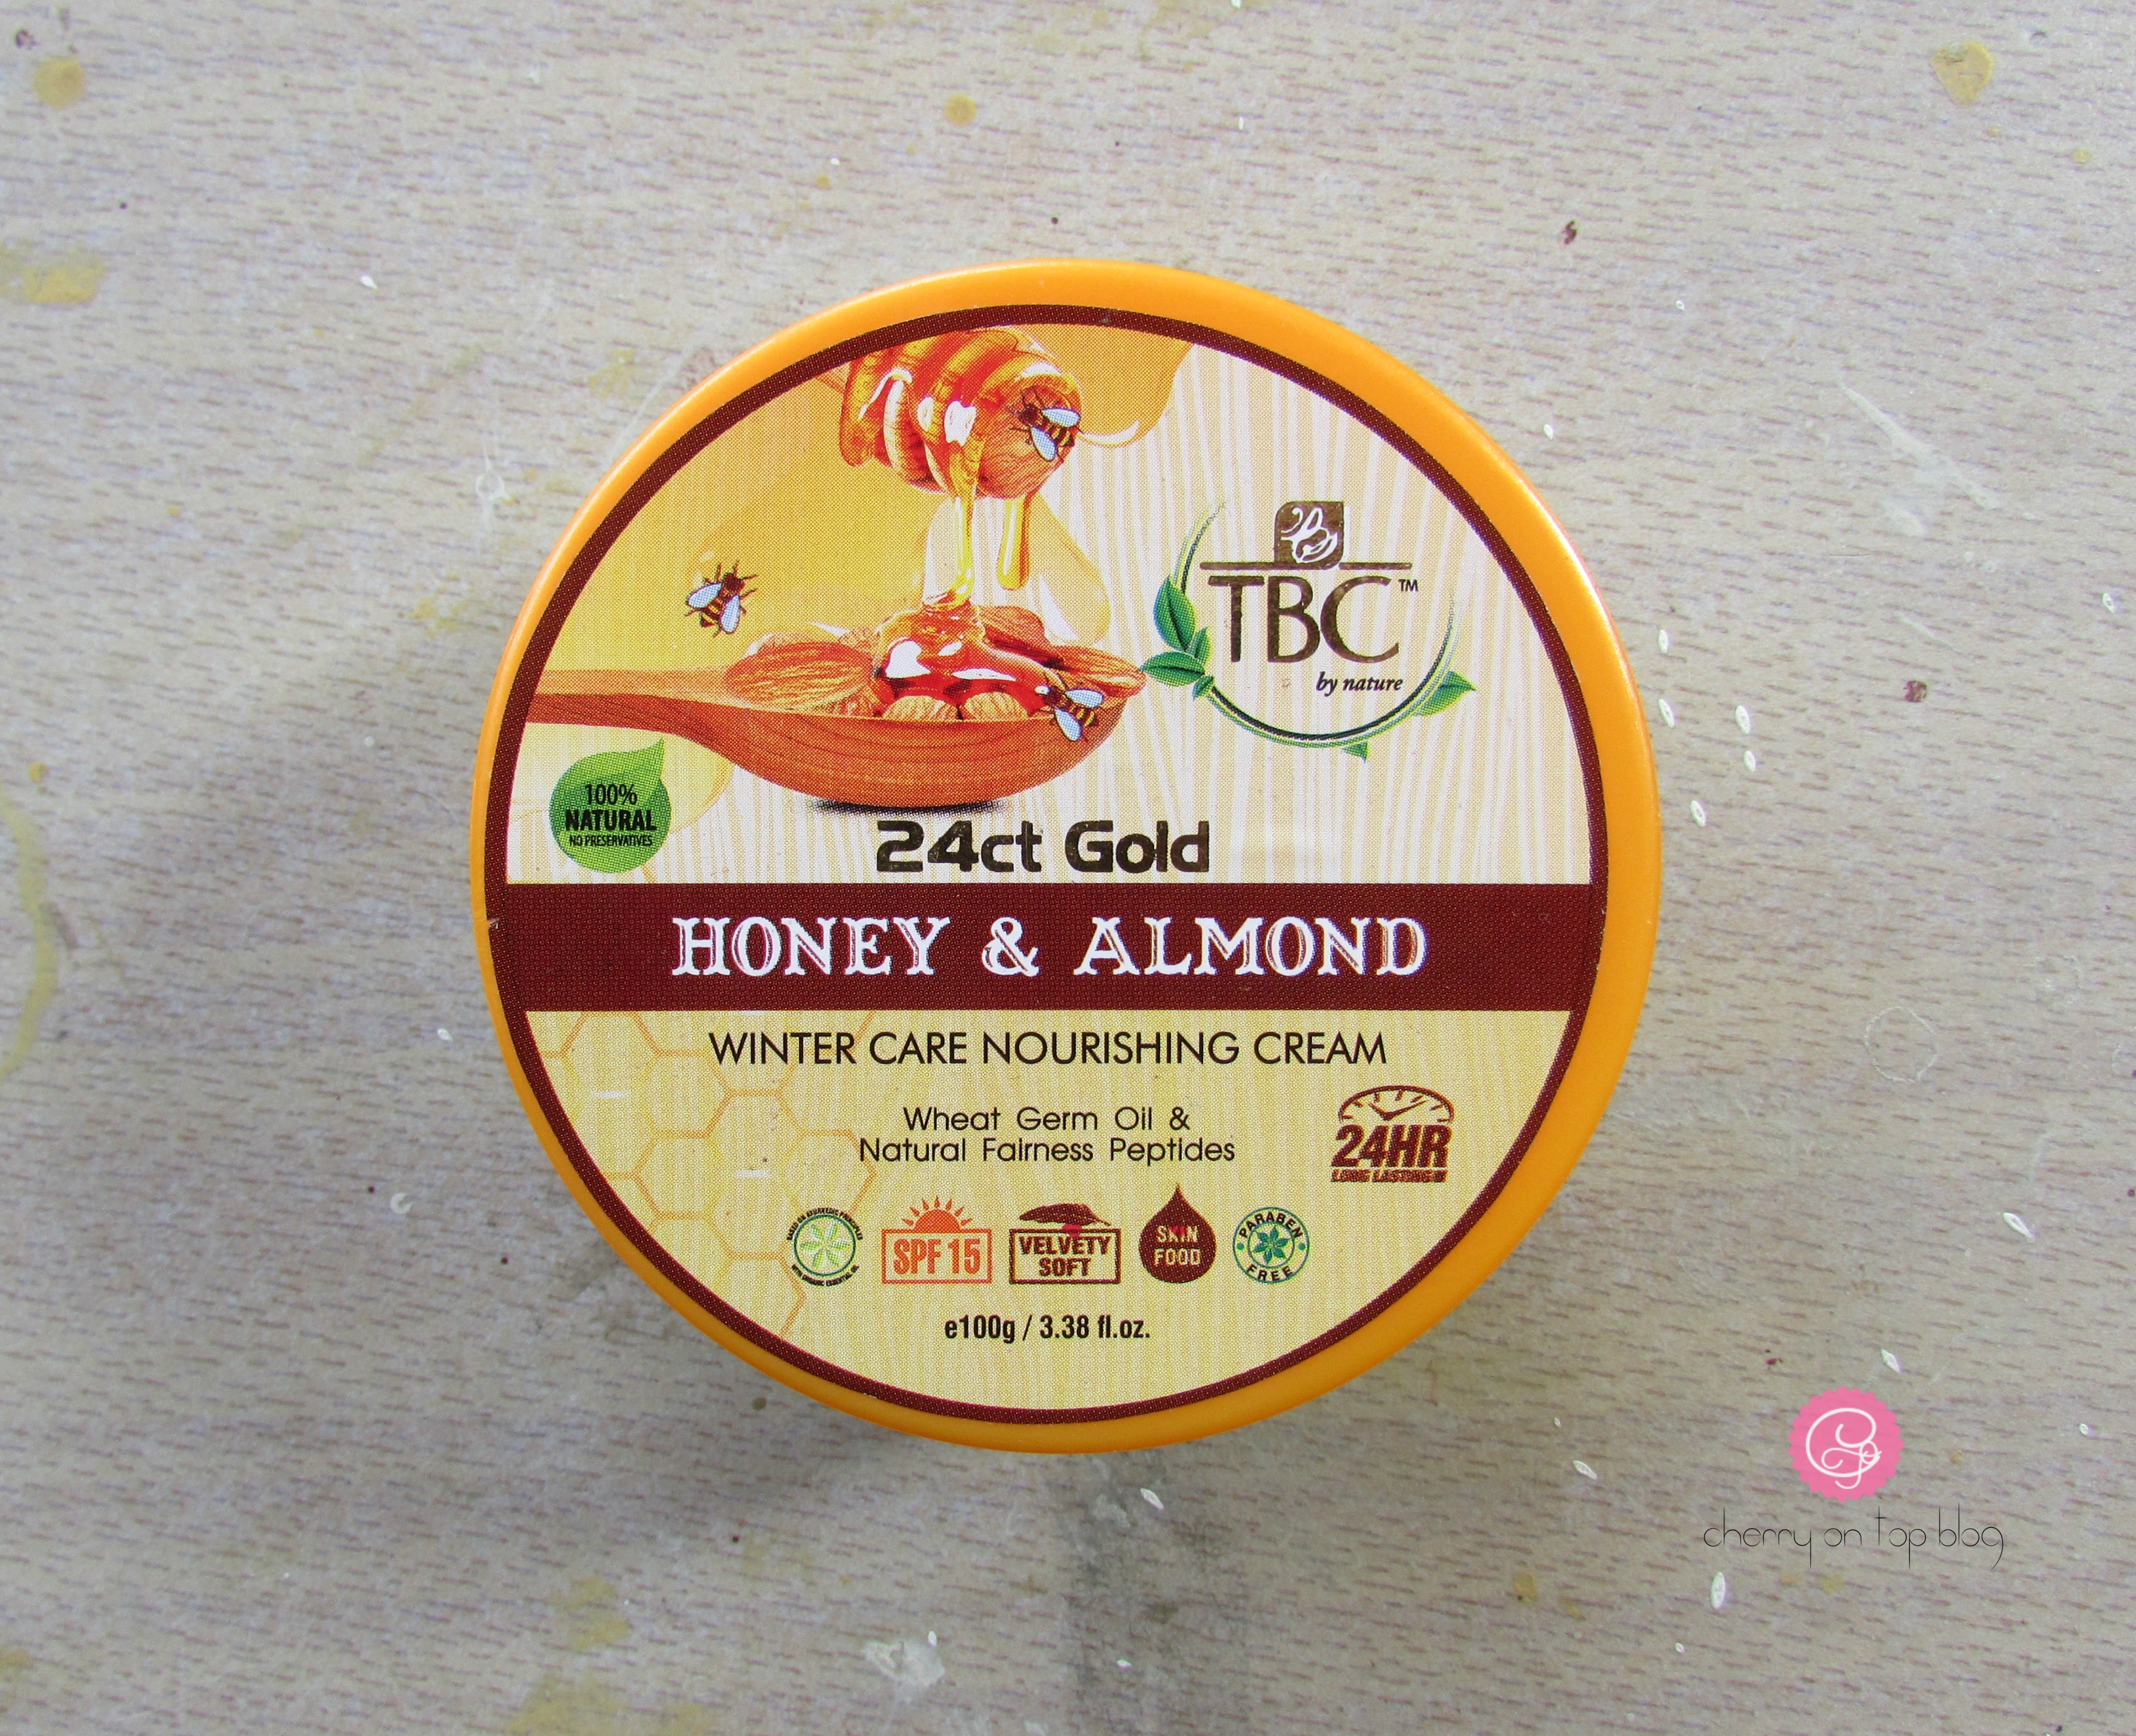 TBC by Nature Honey & Almond Winter Care Nourishing Cream Review| Cherry On Top